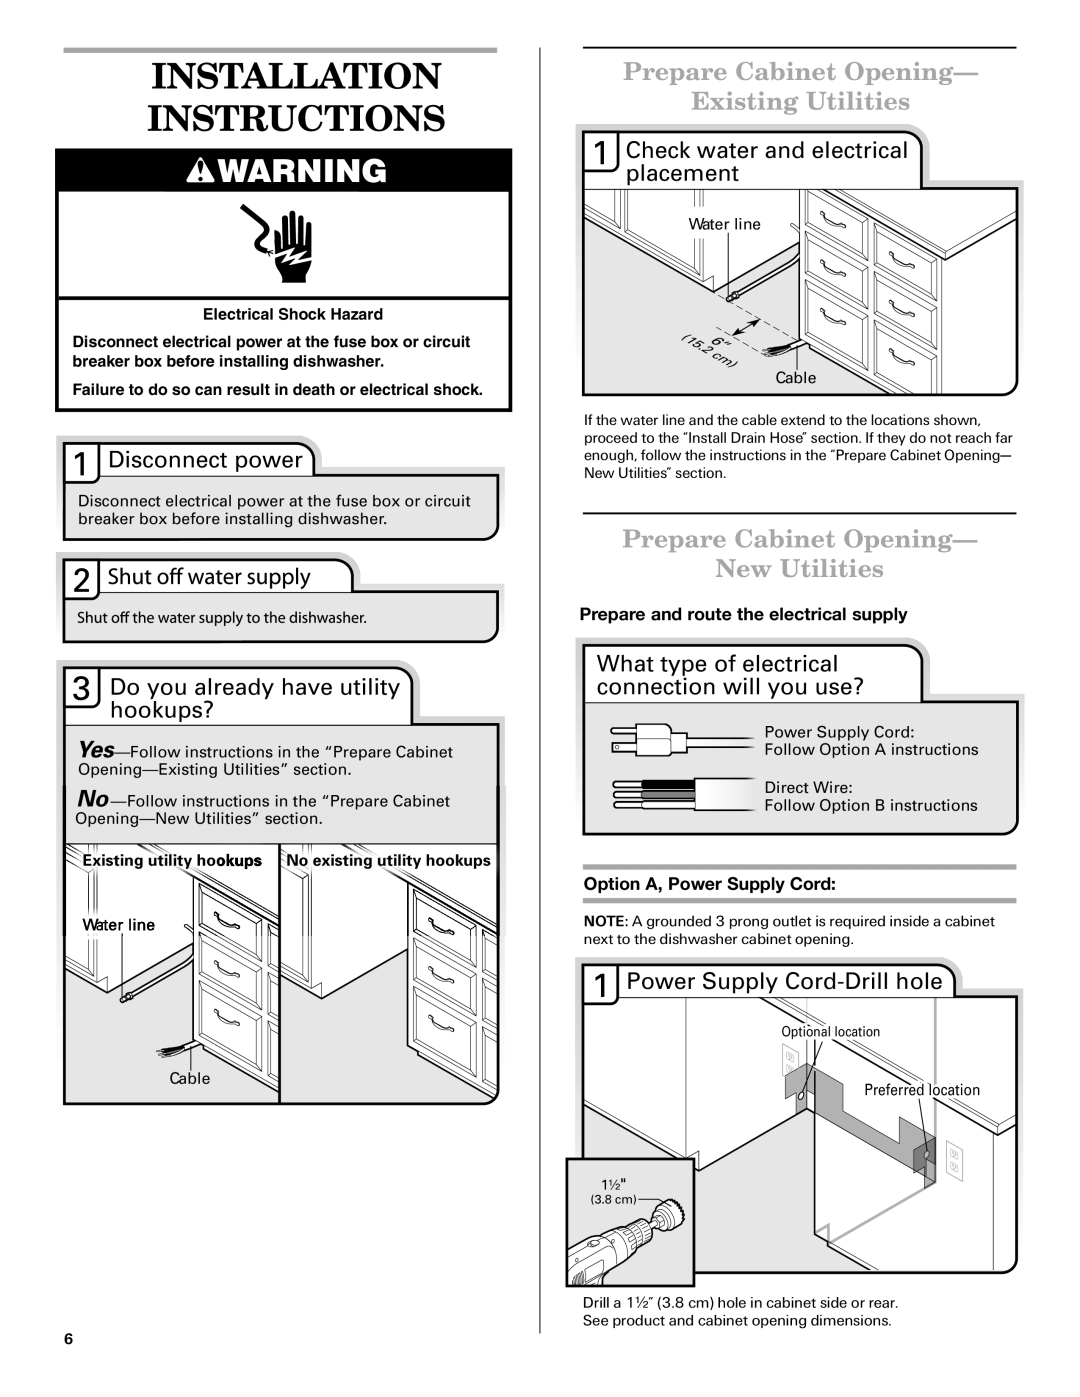 Amana W10261420A Installation Instructions, Prepare Cabinet Opening Existing Utilities, Disconnect power, W ater line 